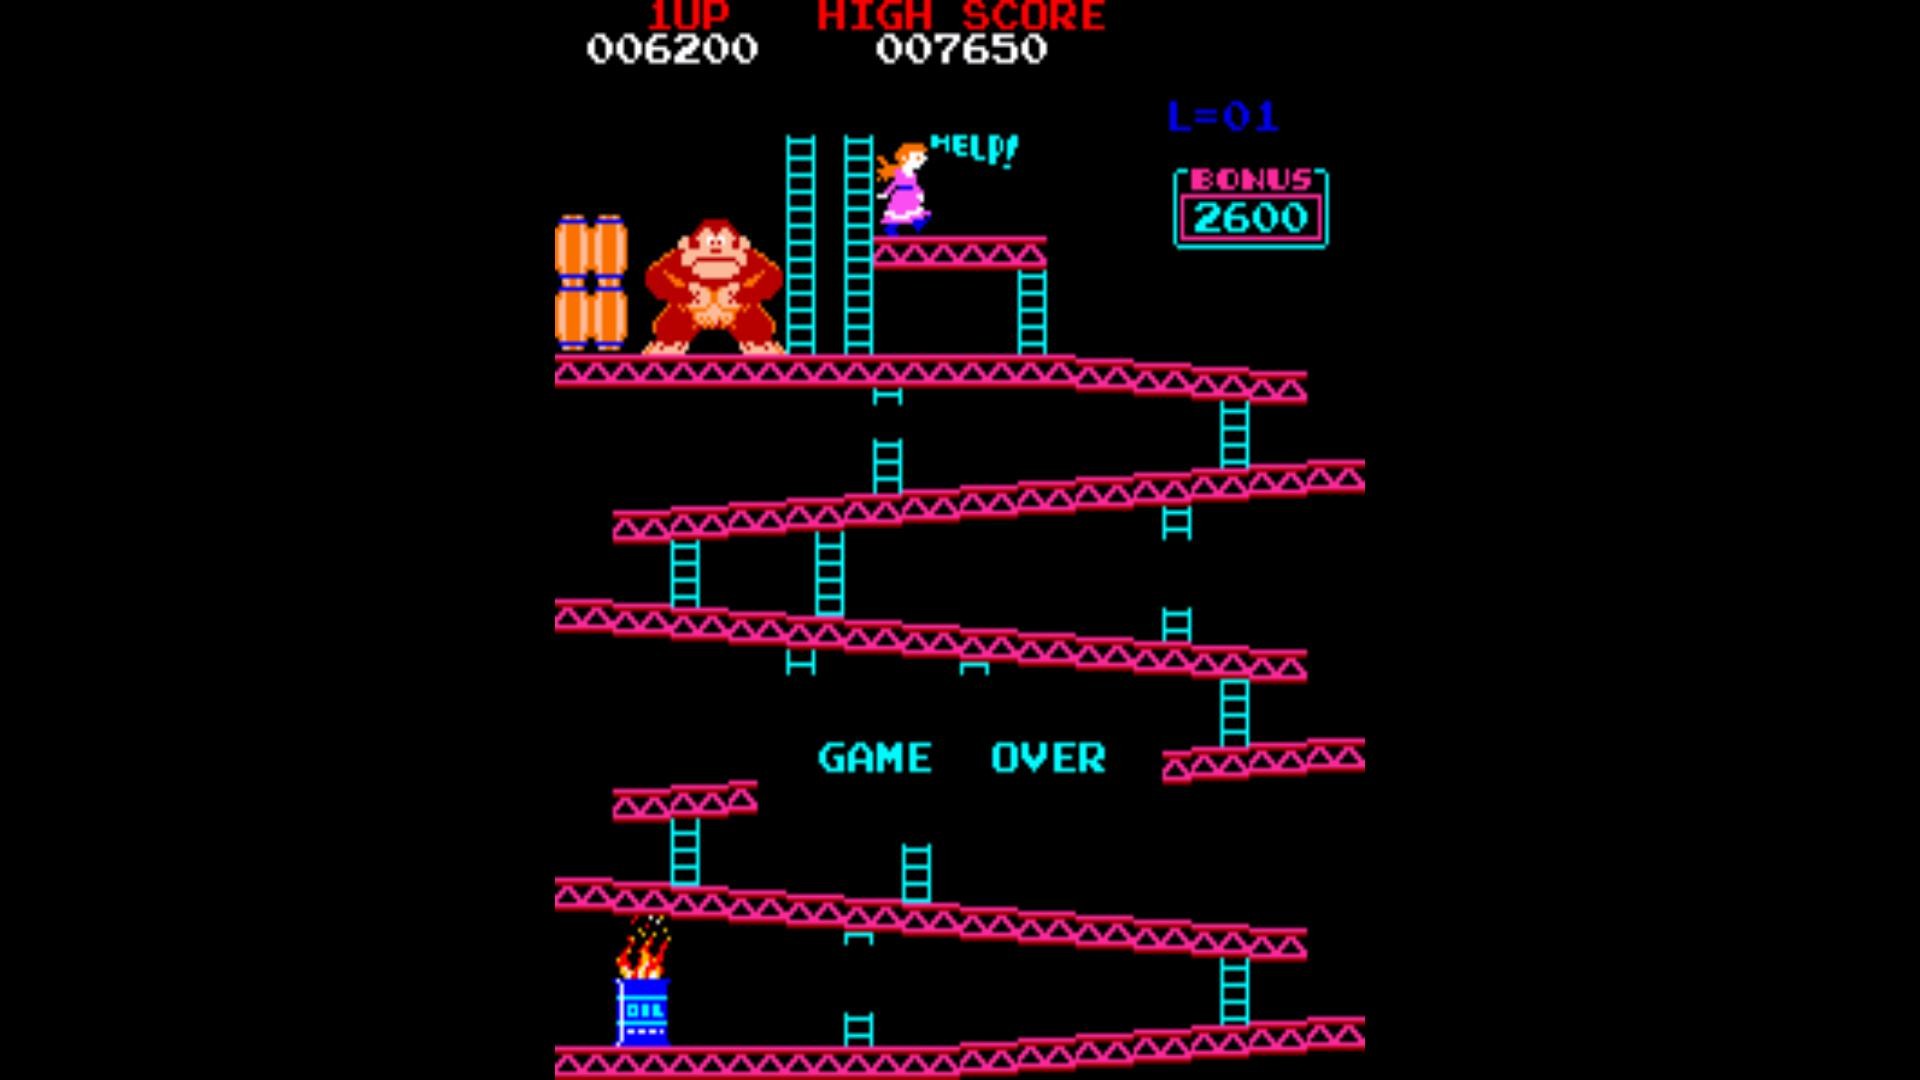 1920x1080 Donkey Kong Game iPhone Wallpapers, iPhone 5(s)/4(s) ...